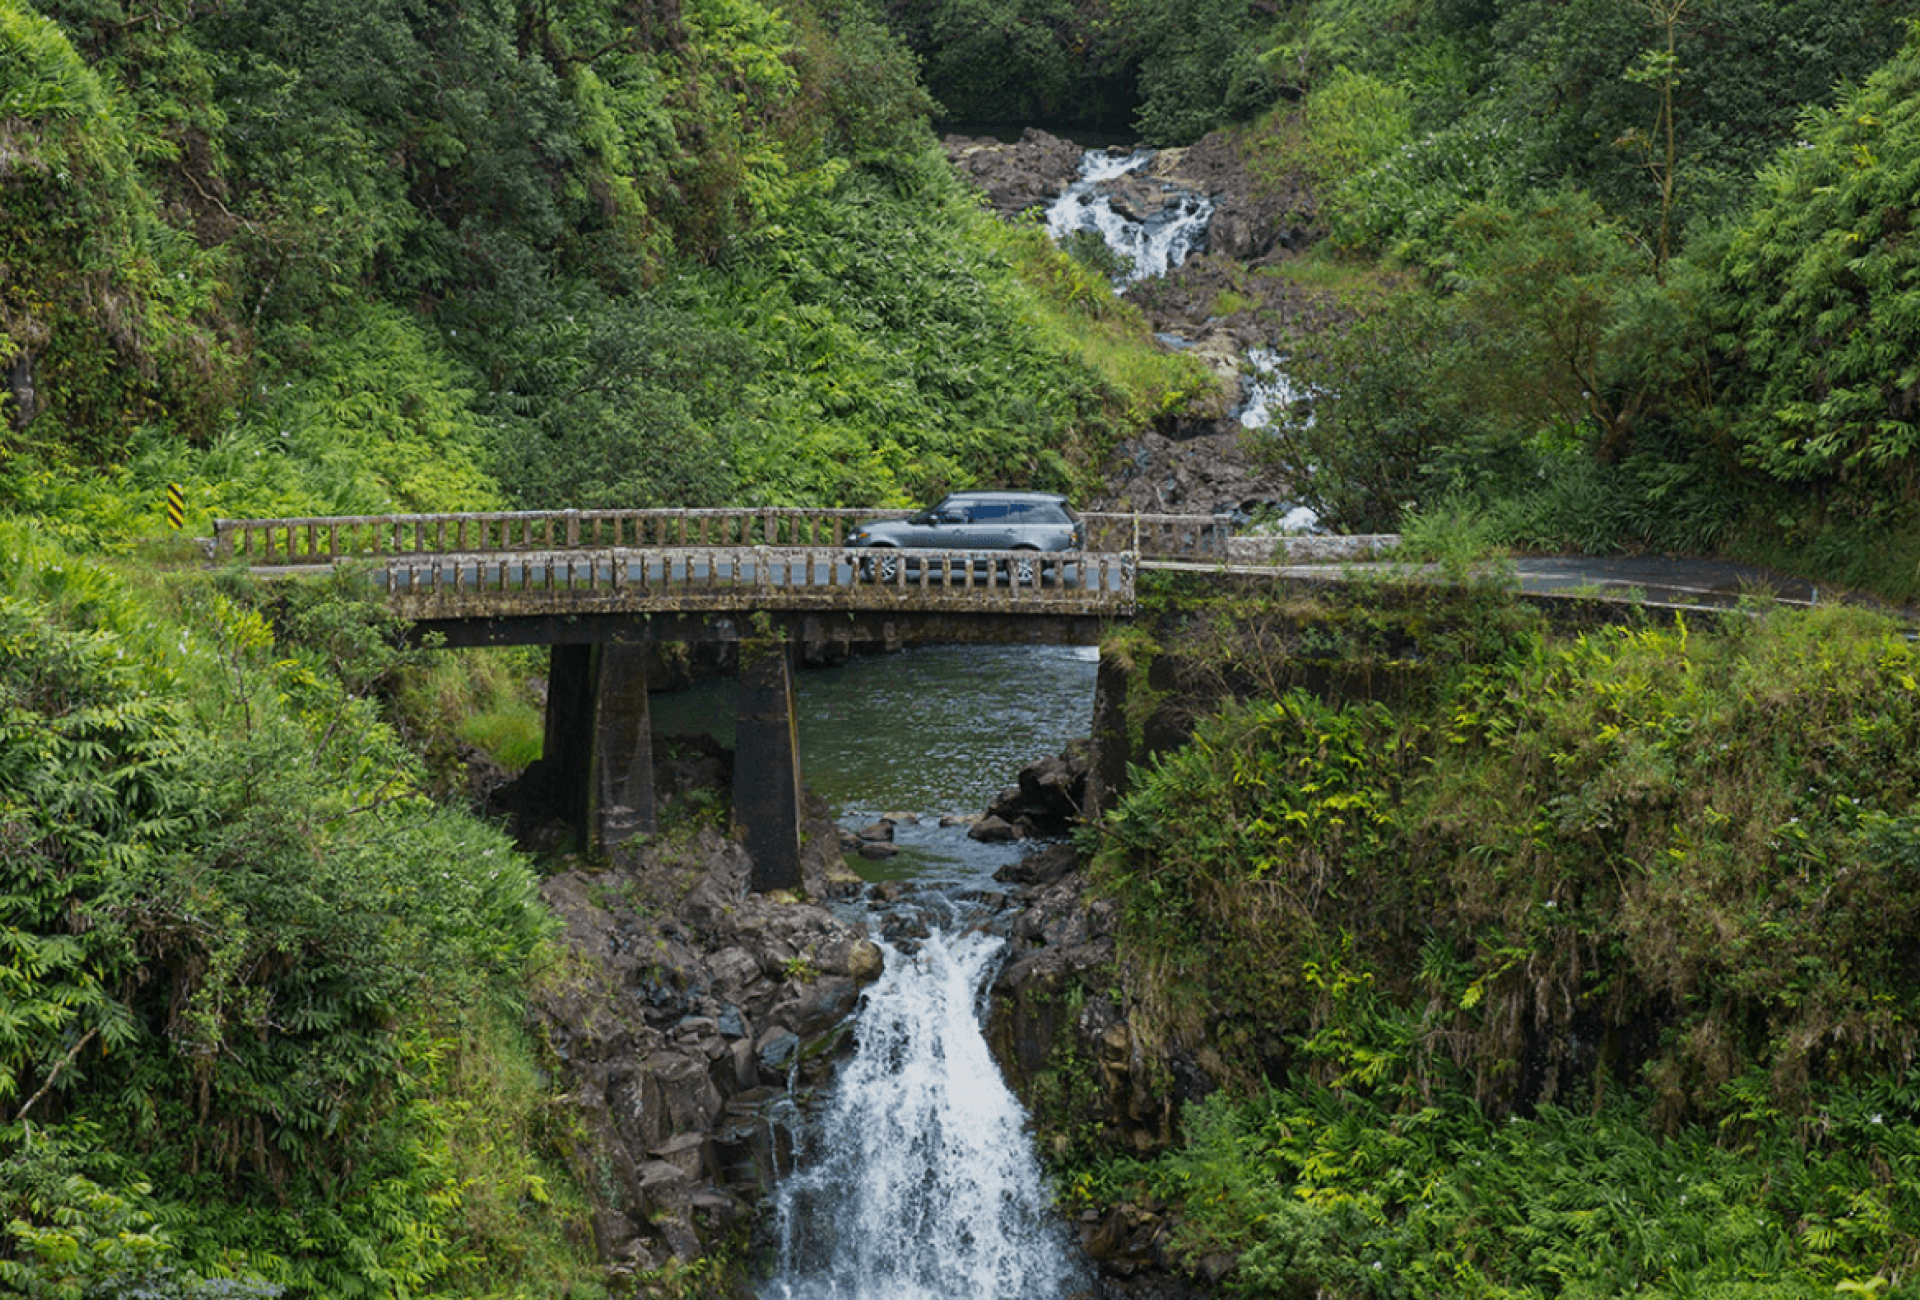 a vehicle drives across a bridge that's situated above a small waterfall and surrounded by green foliage and trees